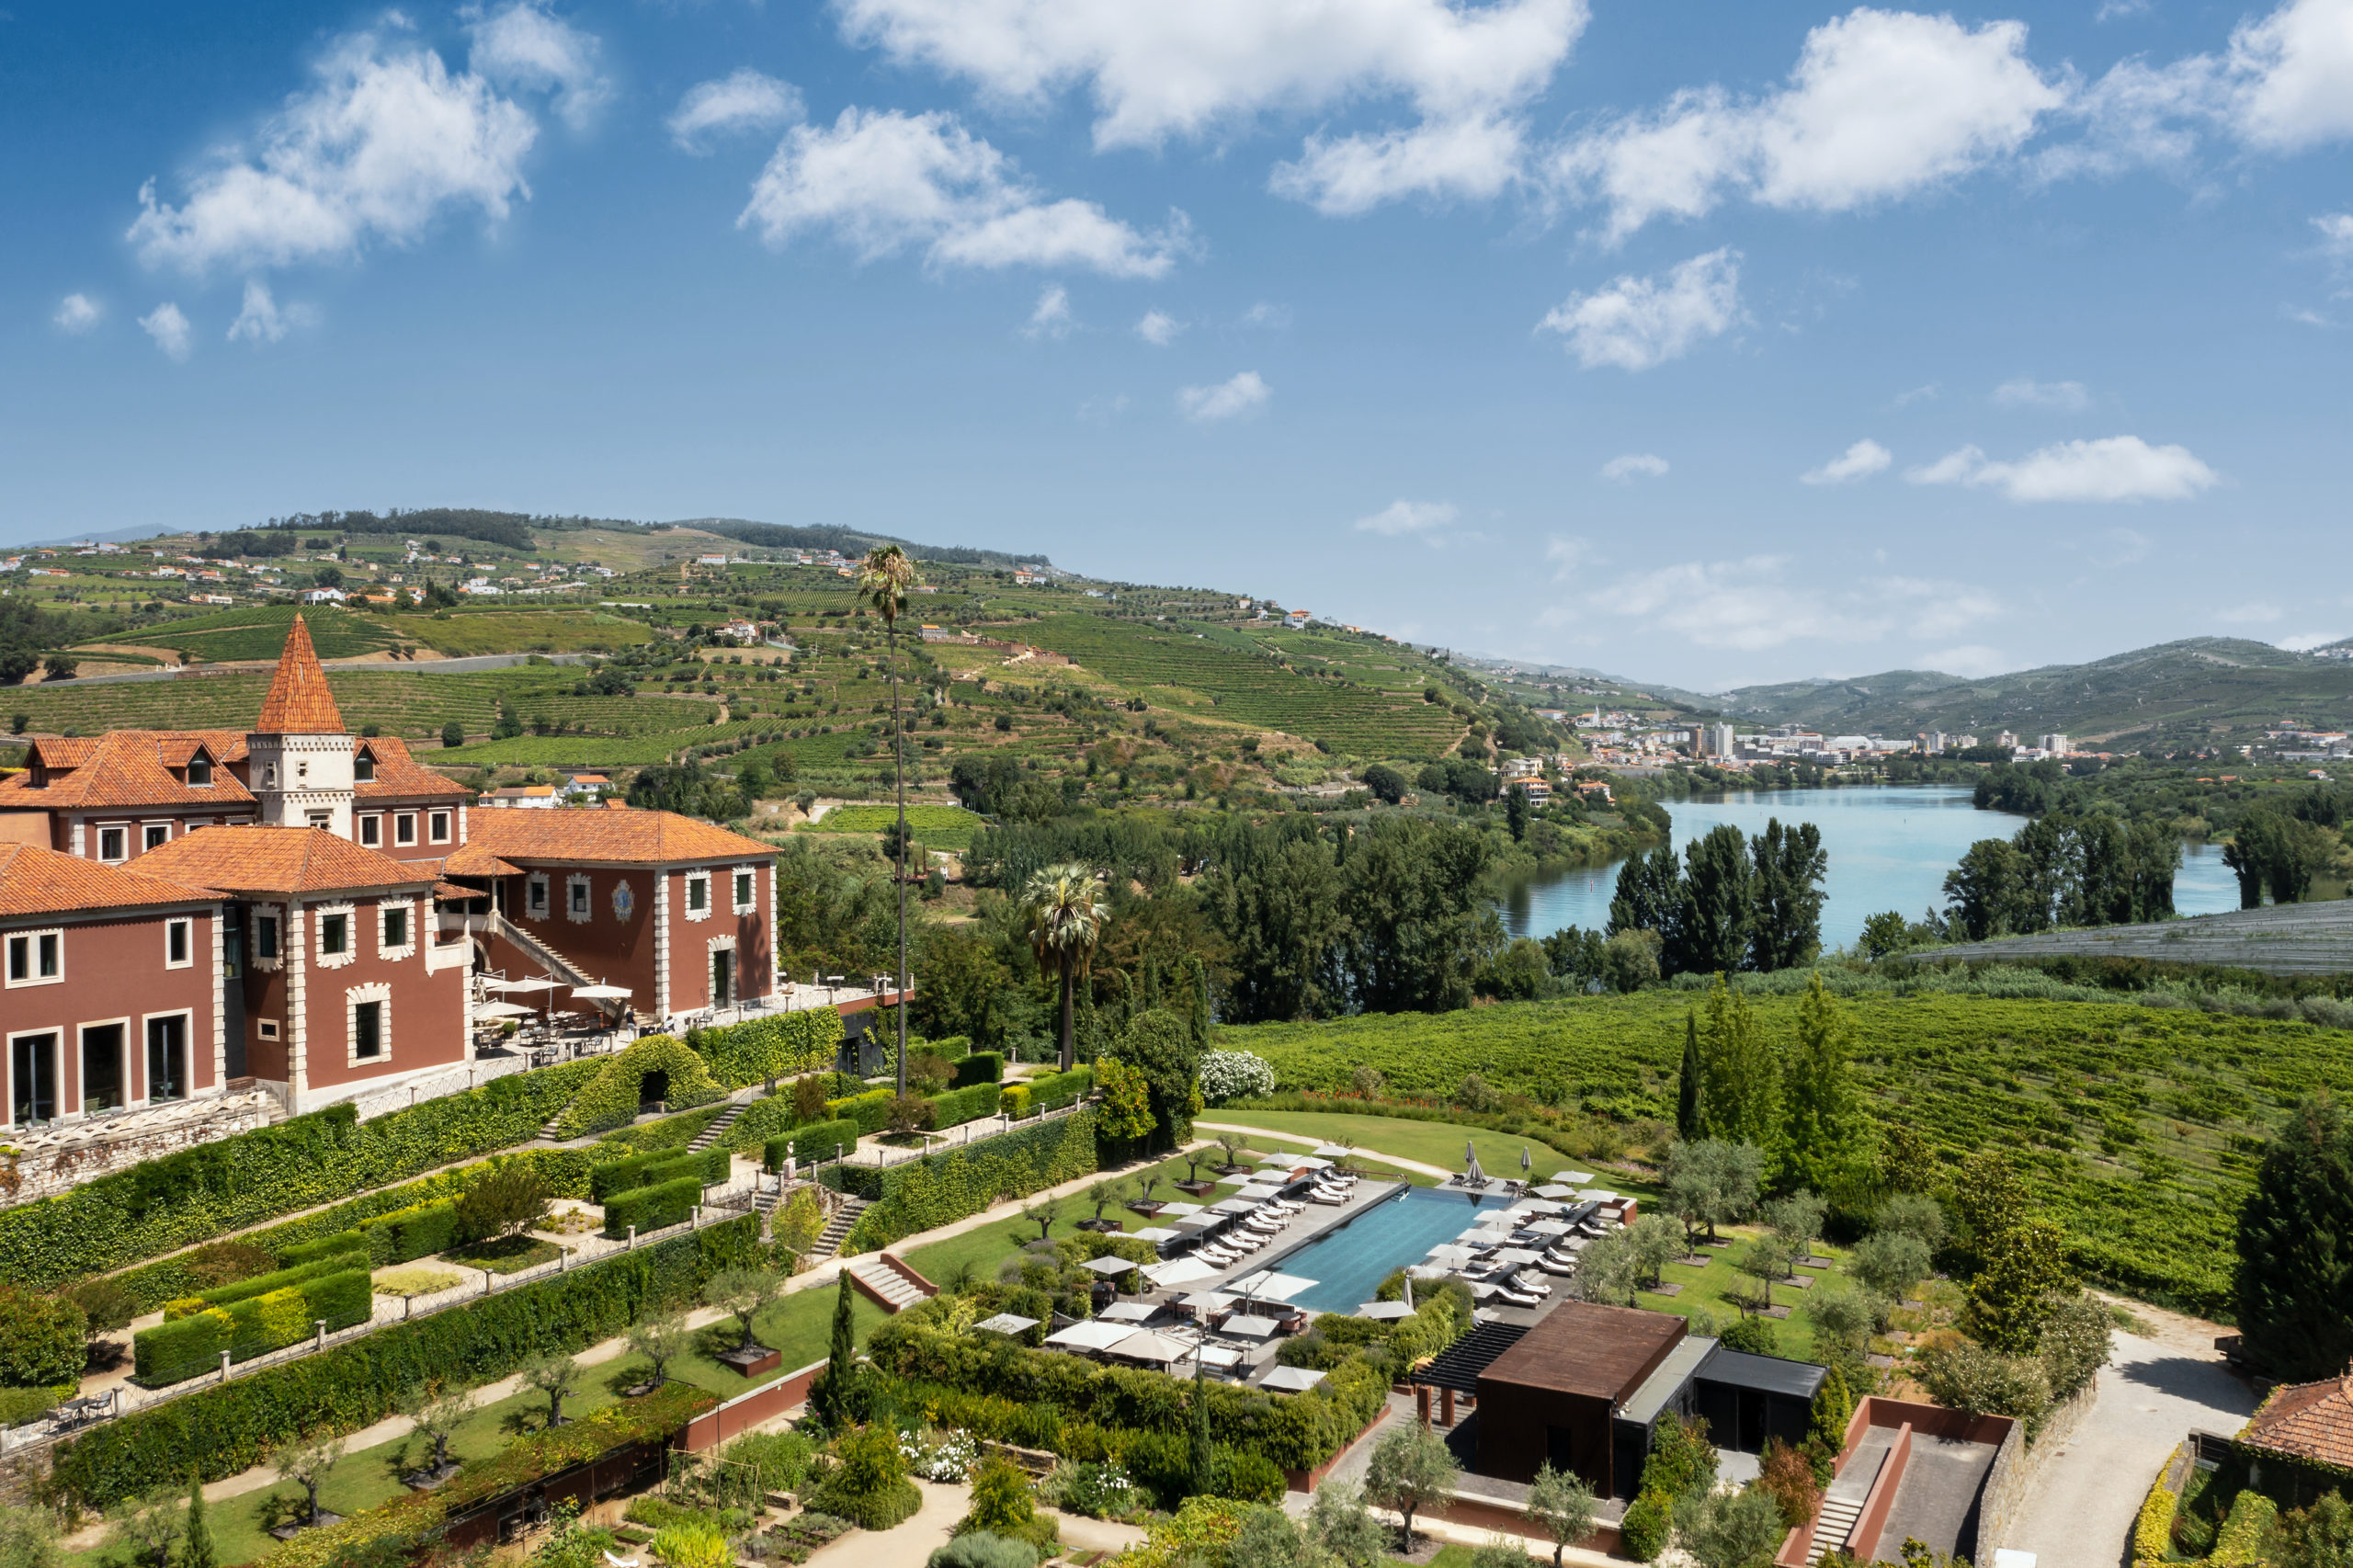 Six Senses Douro Valley is a role model for sustainability practices